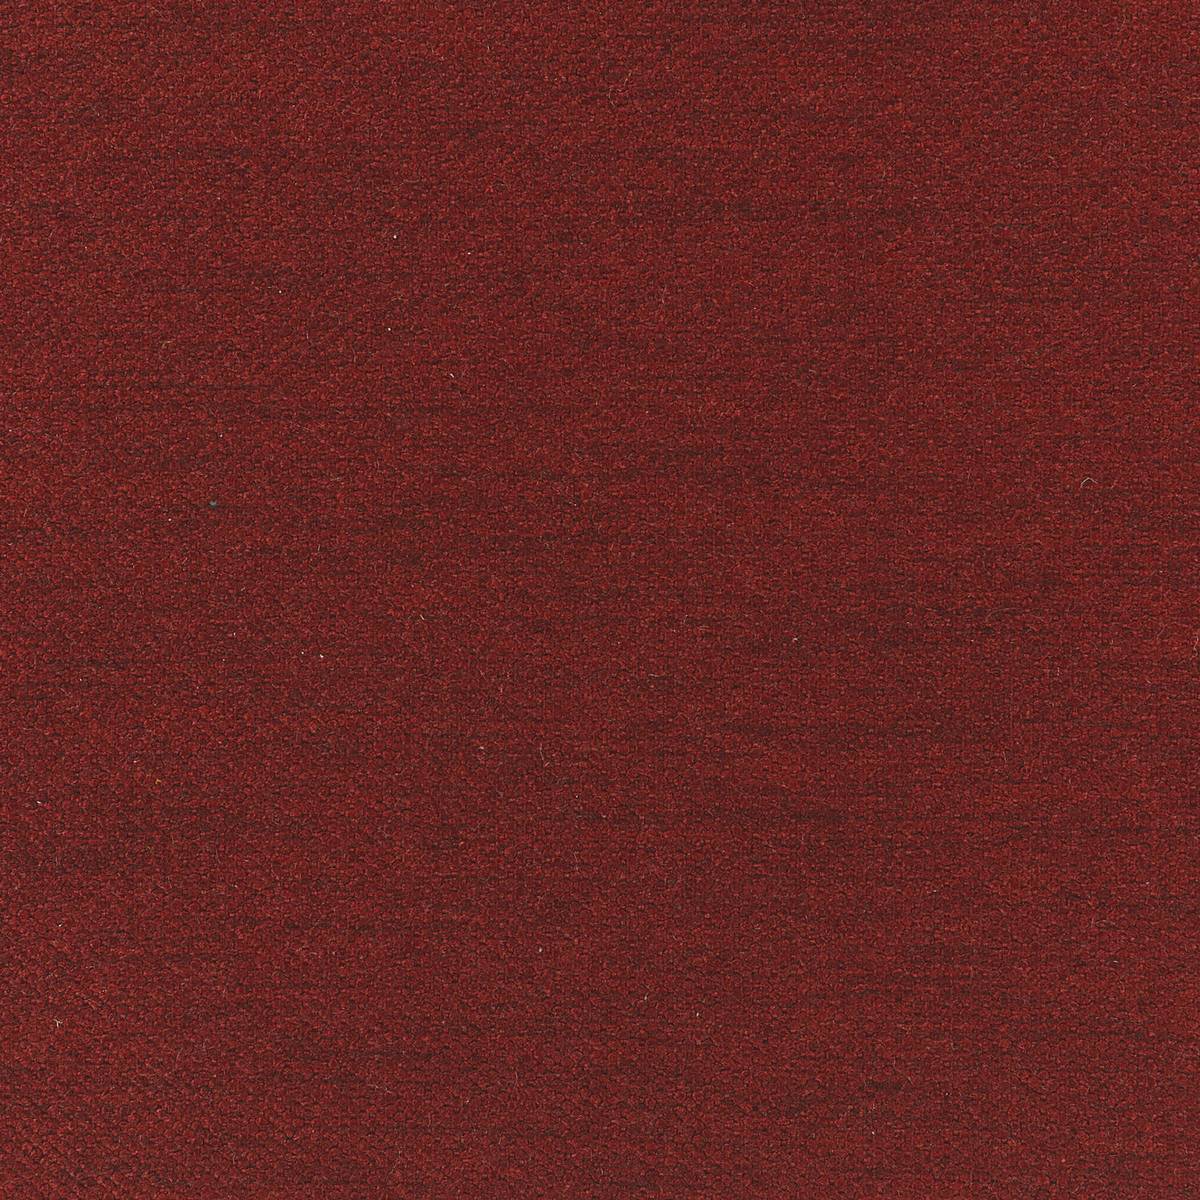 Factor Maroon Fabric by Harlequin